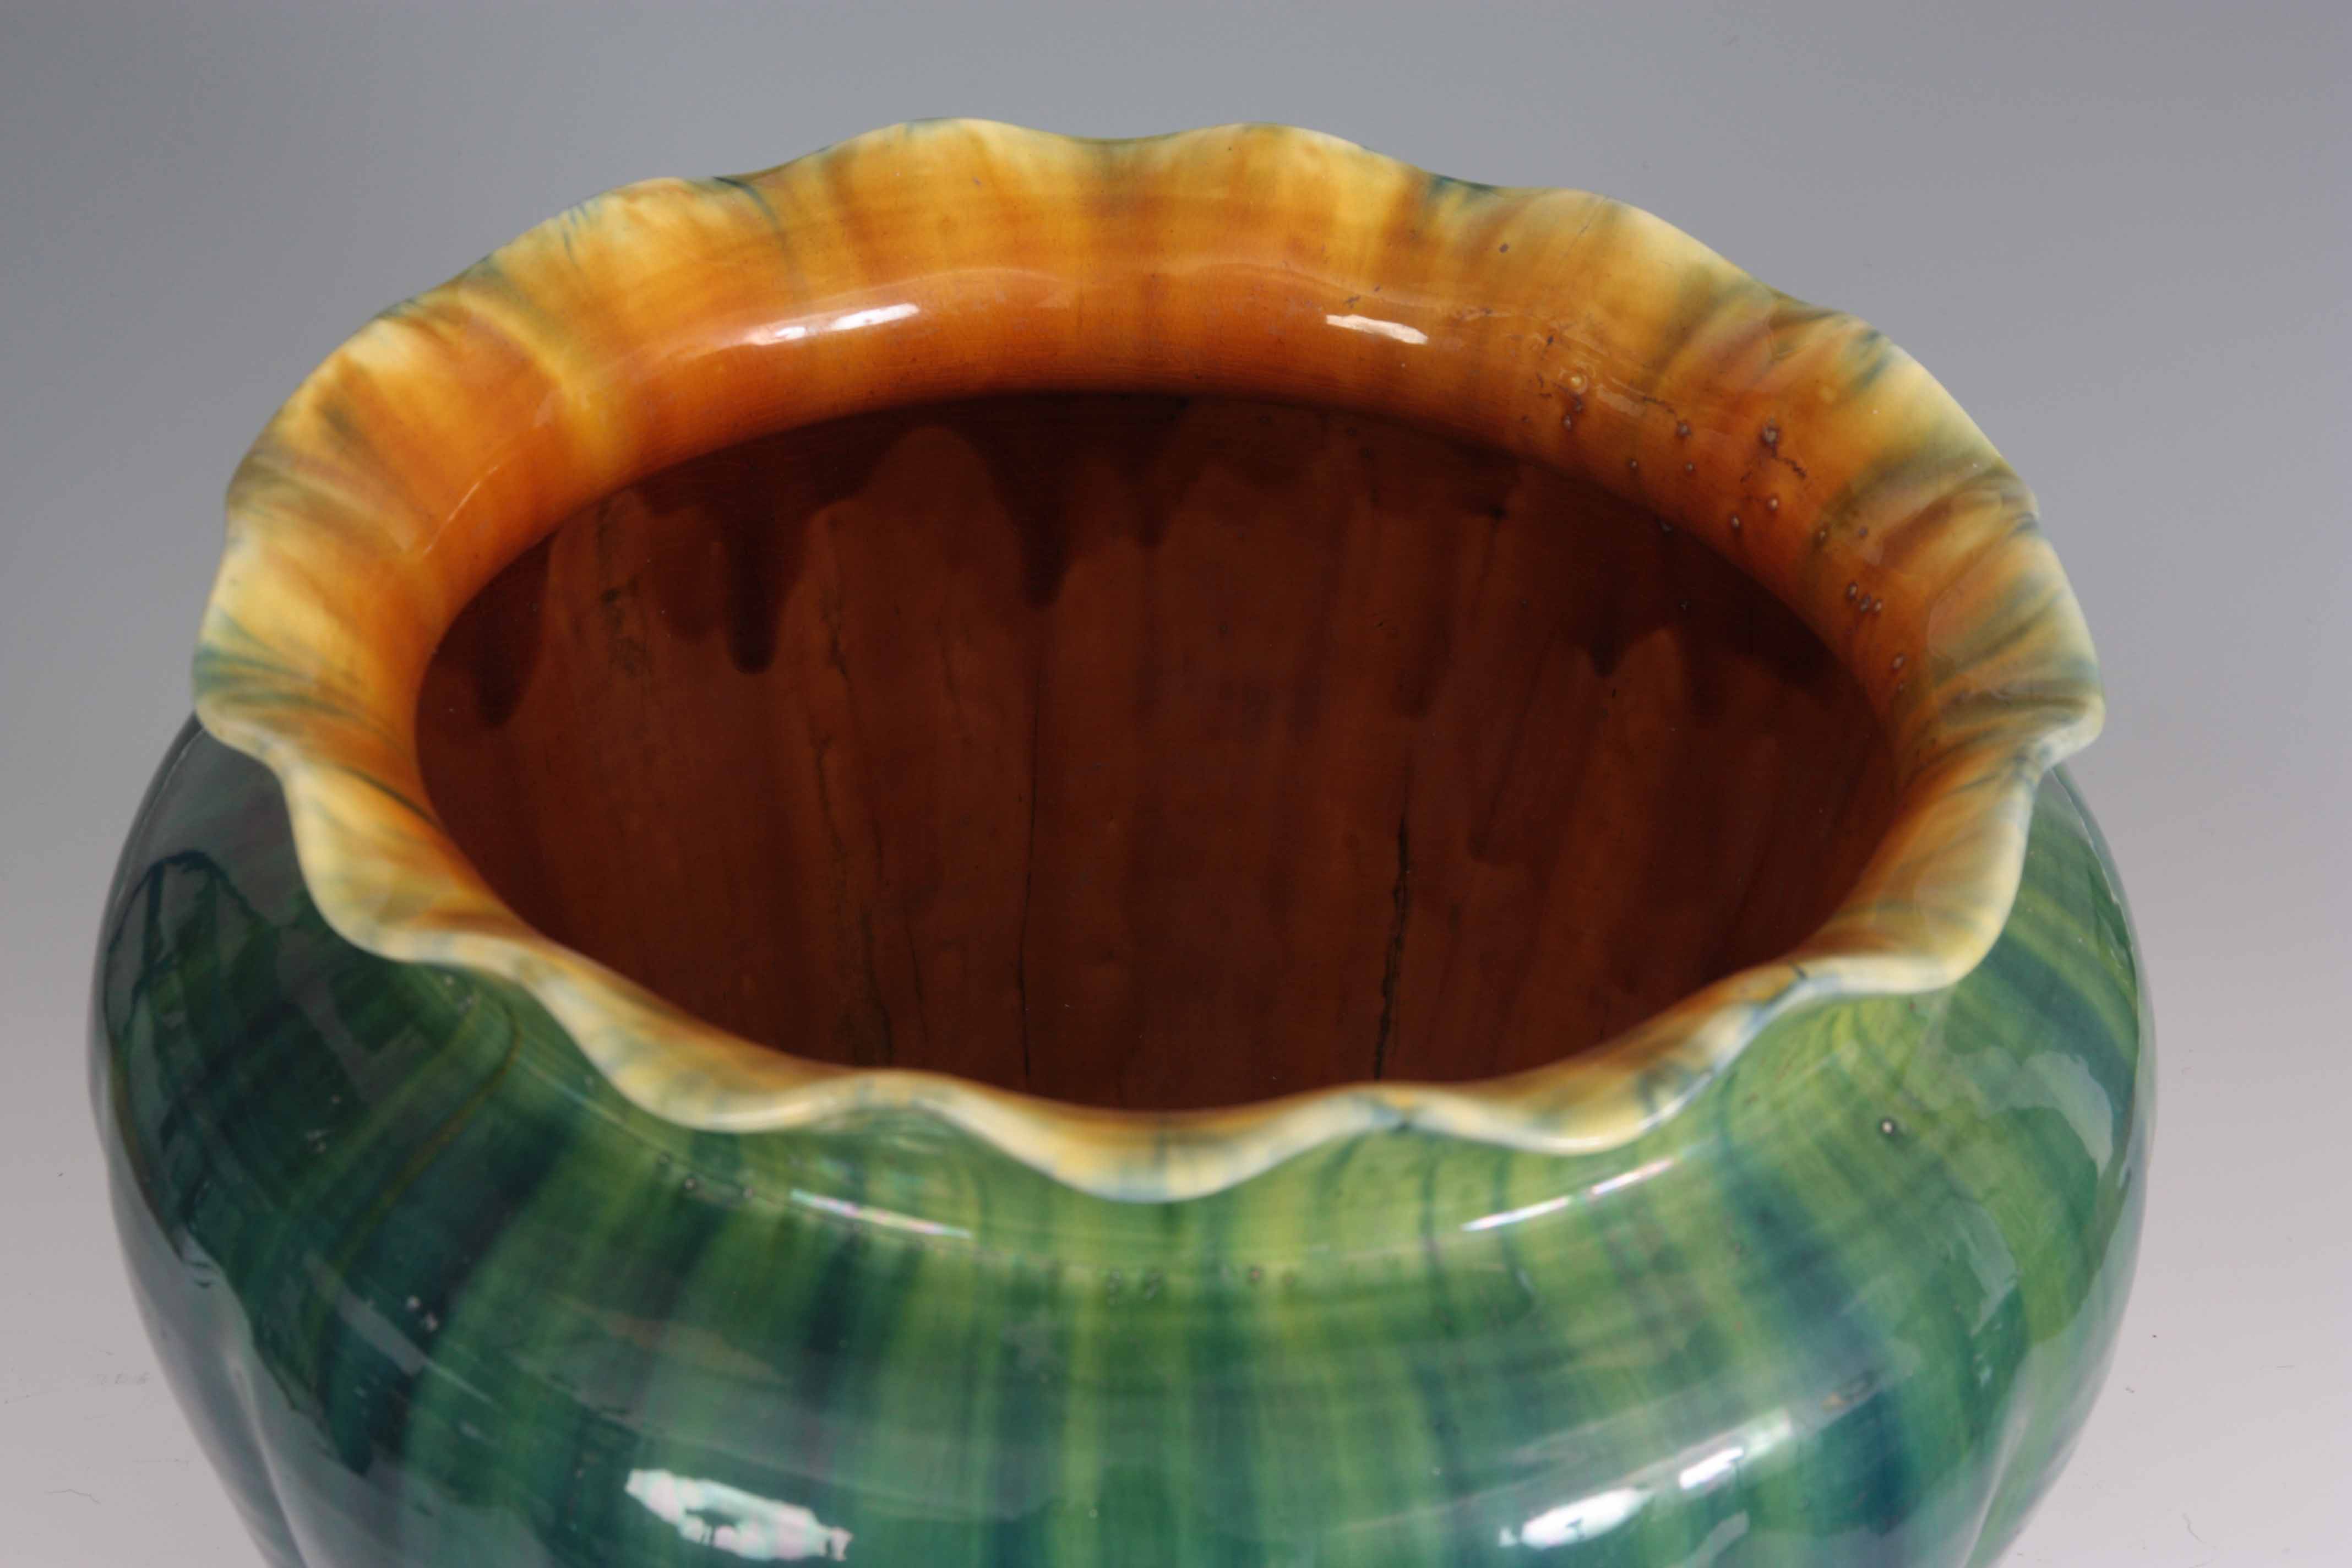 A LARGE EARLY 20th CENTURY LINTHORPE POTTERY JARDINIÈRE with green and orange glaze, ribbed body and - Image 2 of 3